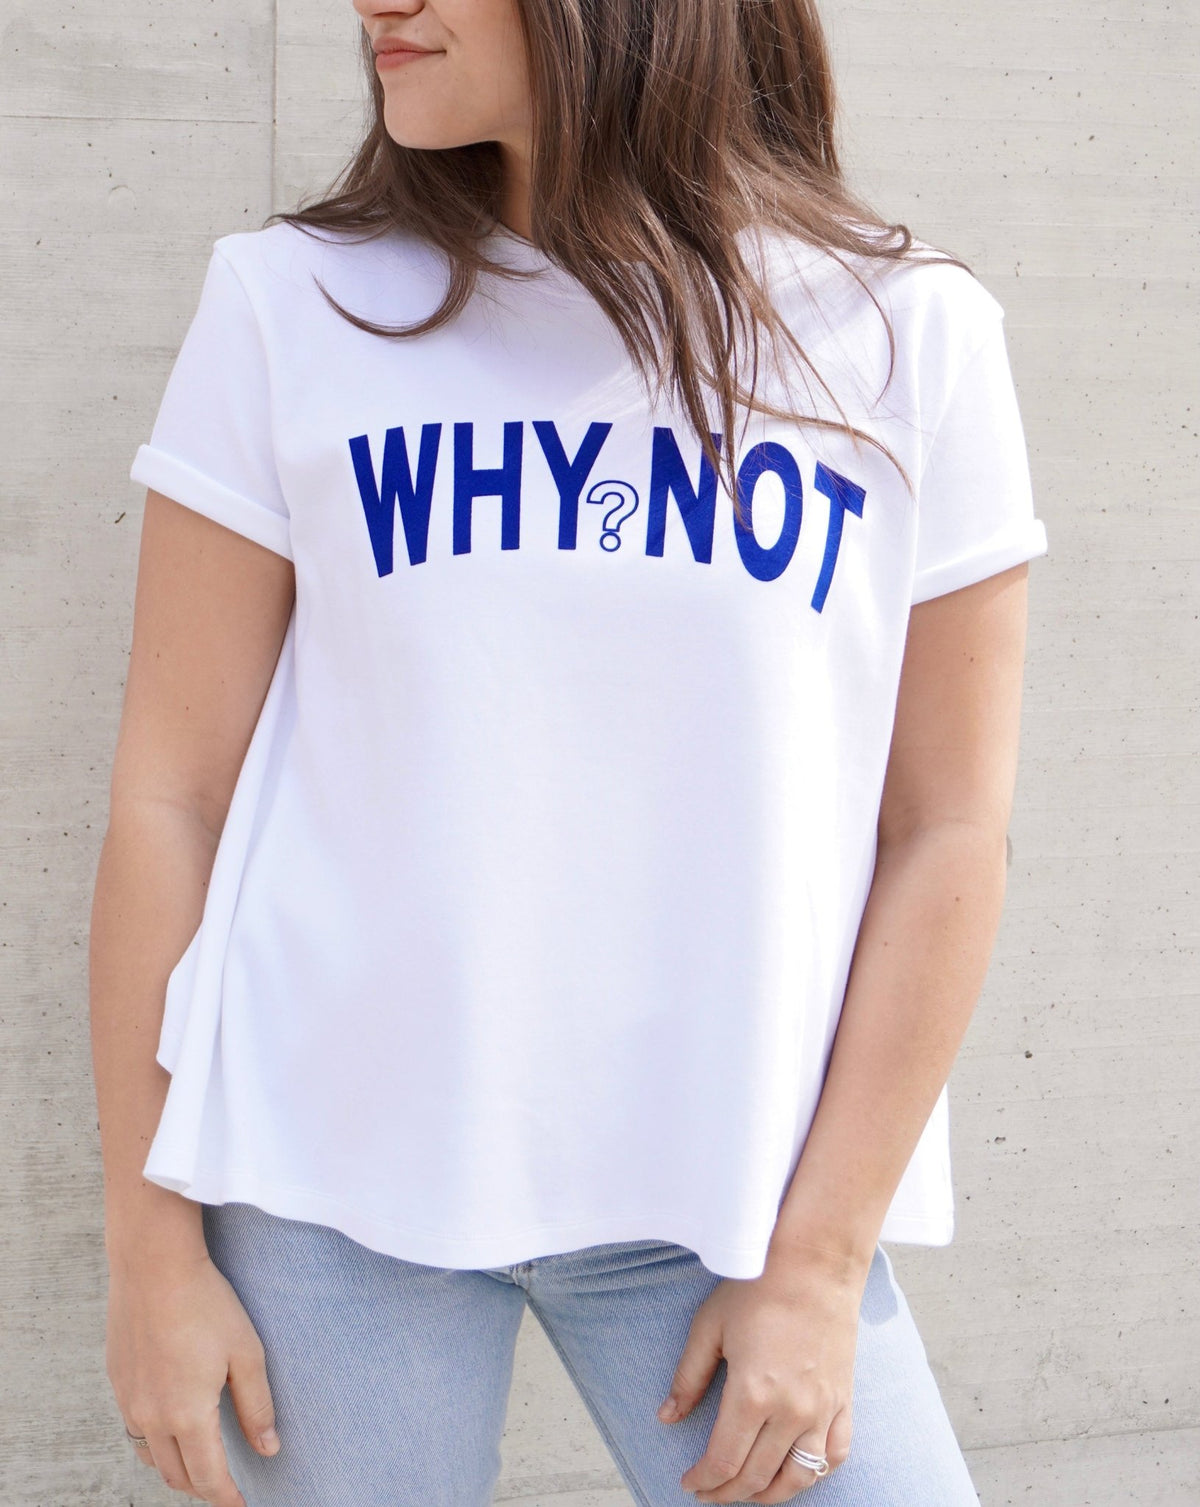 &#39;WHY NOT?&#39; Flowy T-Shirt - OBLIVIOUS?